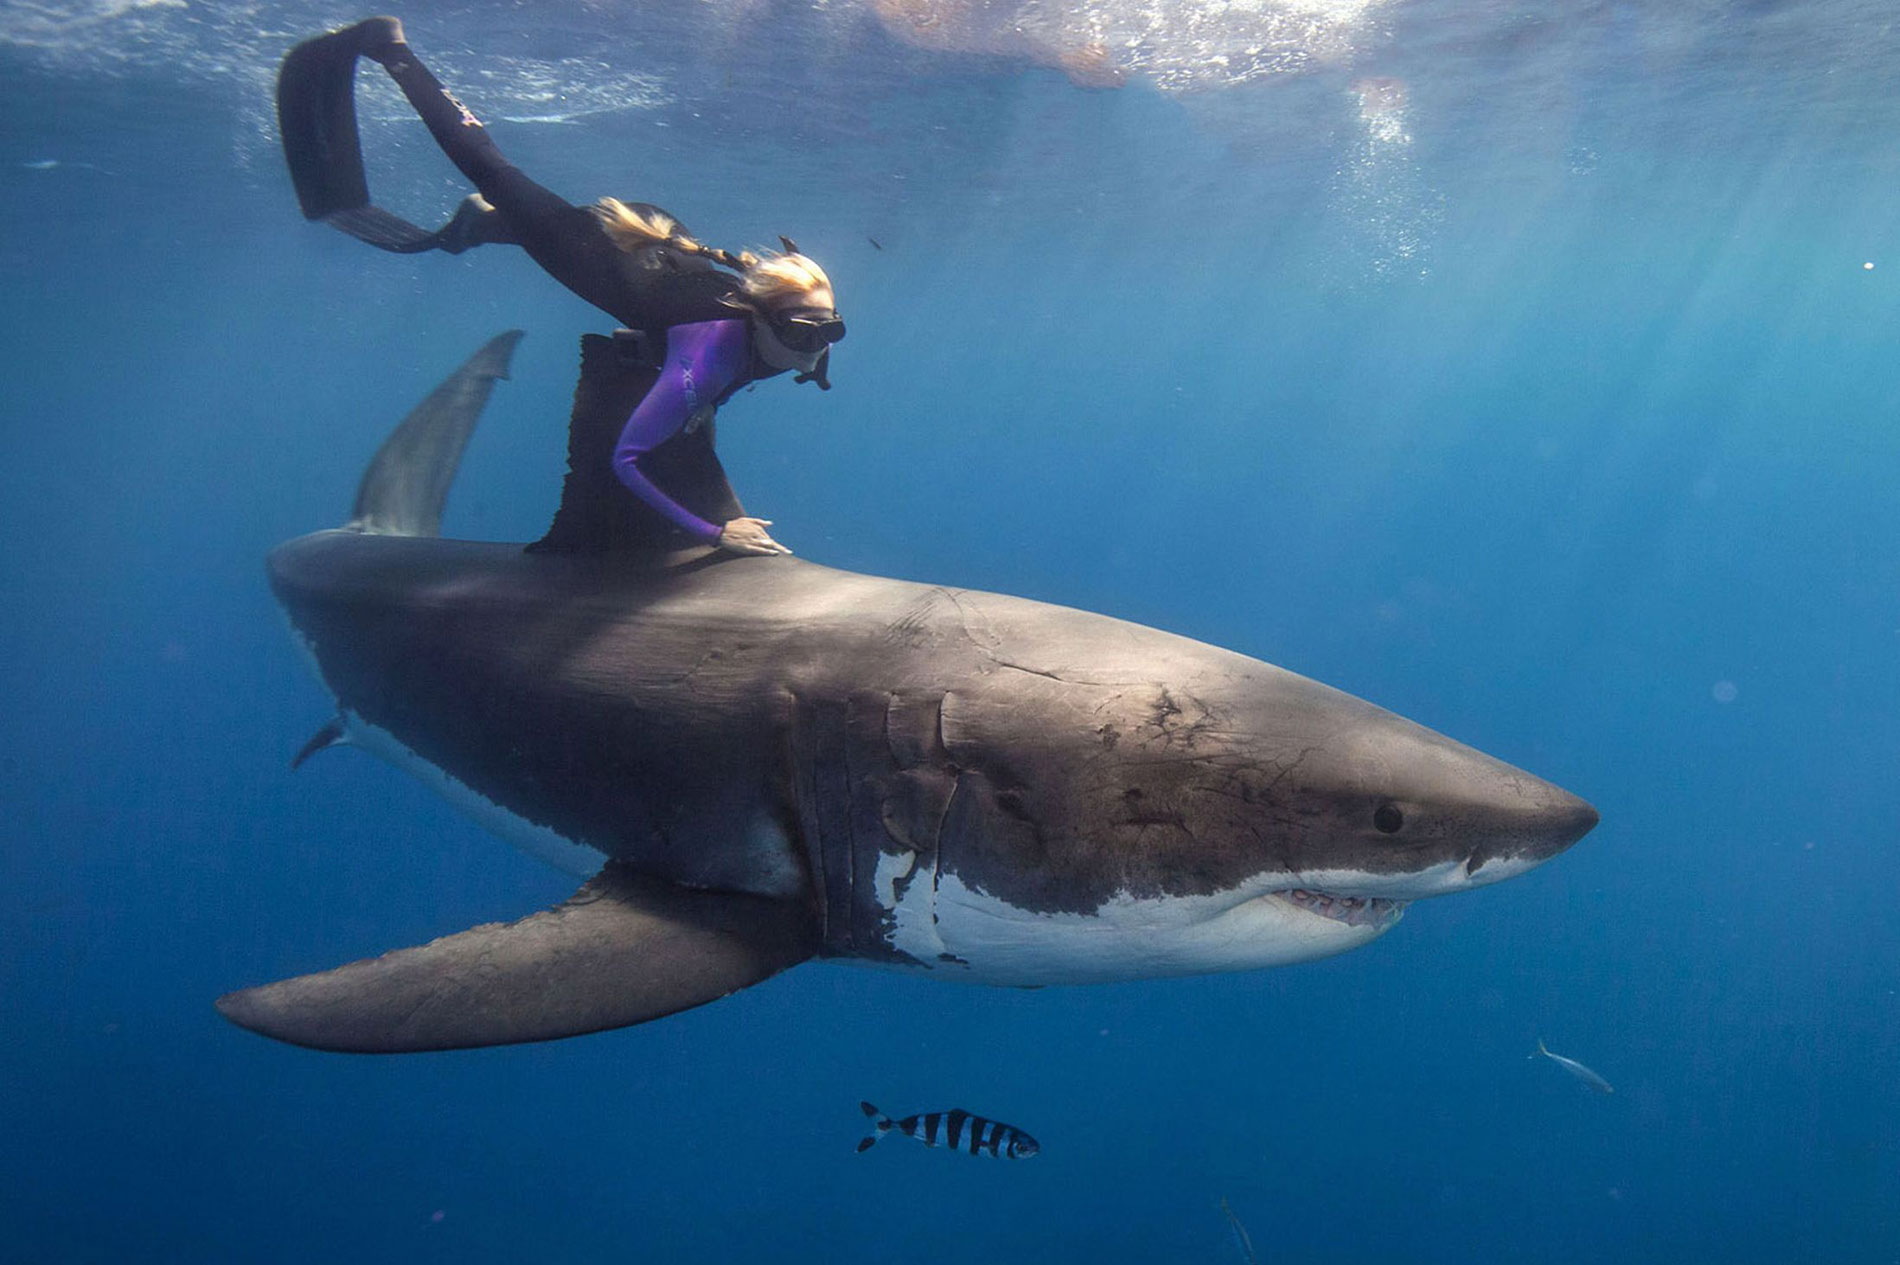 This Woman Swims With Great White Sharks In Order To Save Them